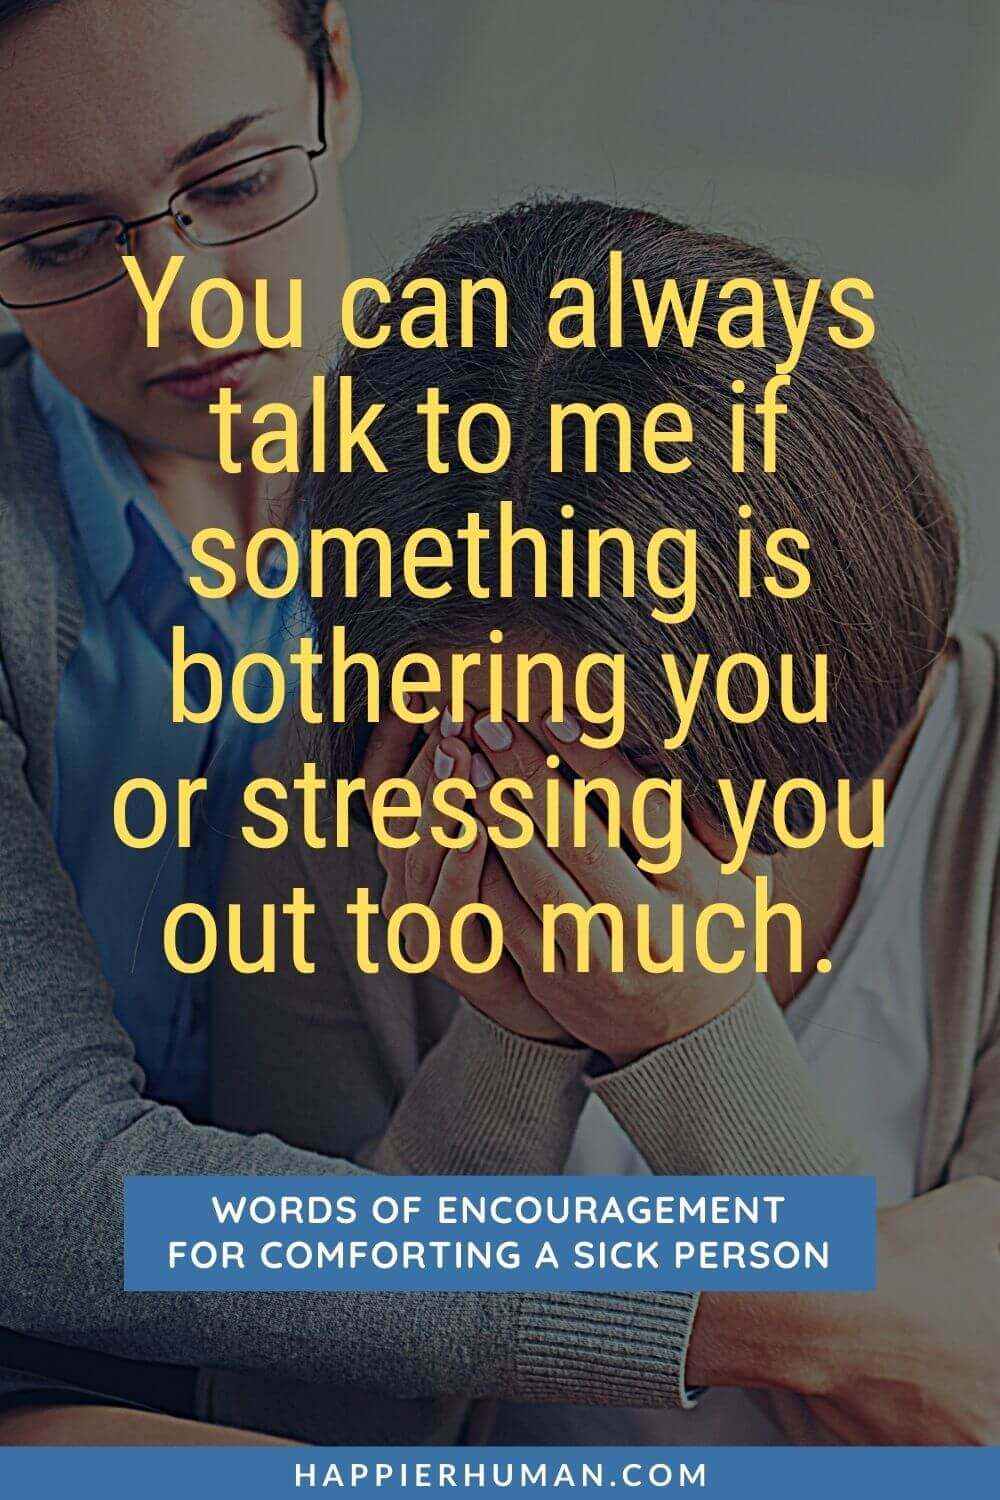 Words of Encouragement for Sick Person - You can always talk to me if something is bothering you or stressing you out too much. | words of encouragement for sick person religious |funny words of encouragement for sick person | what to say when someone is ill